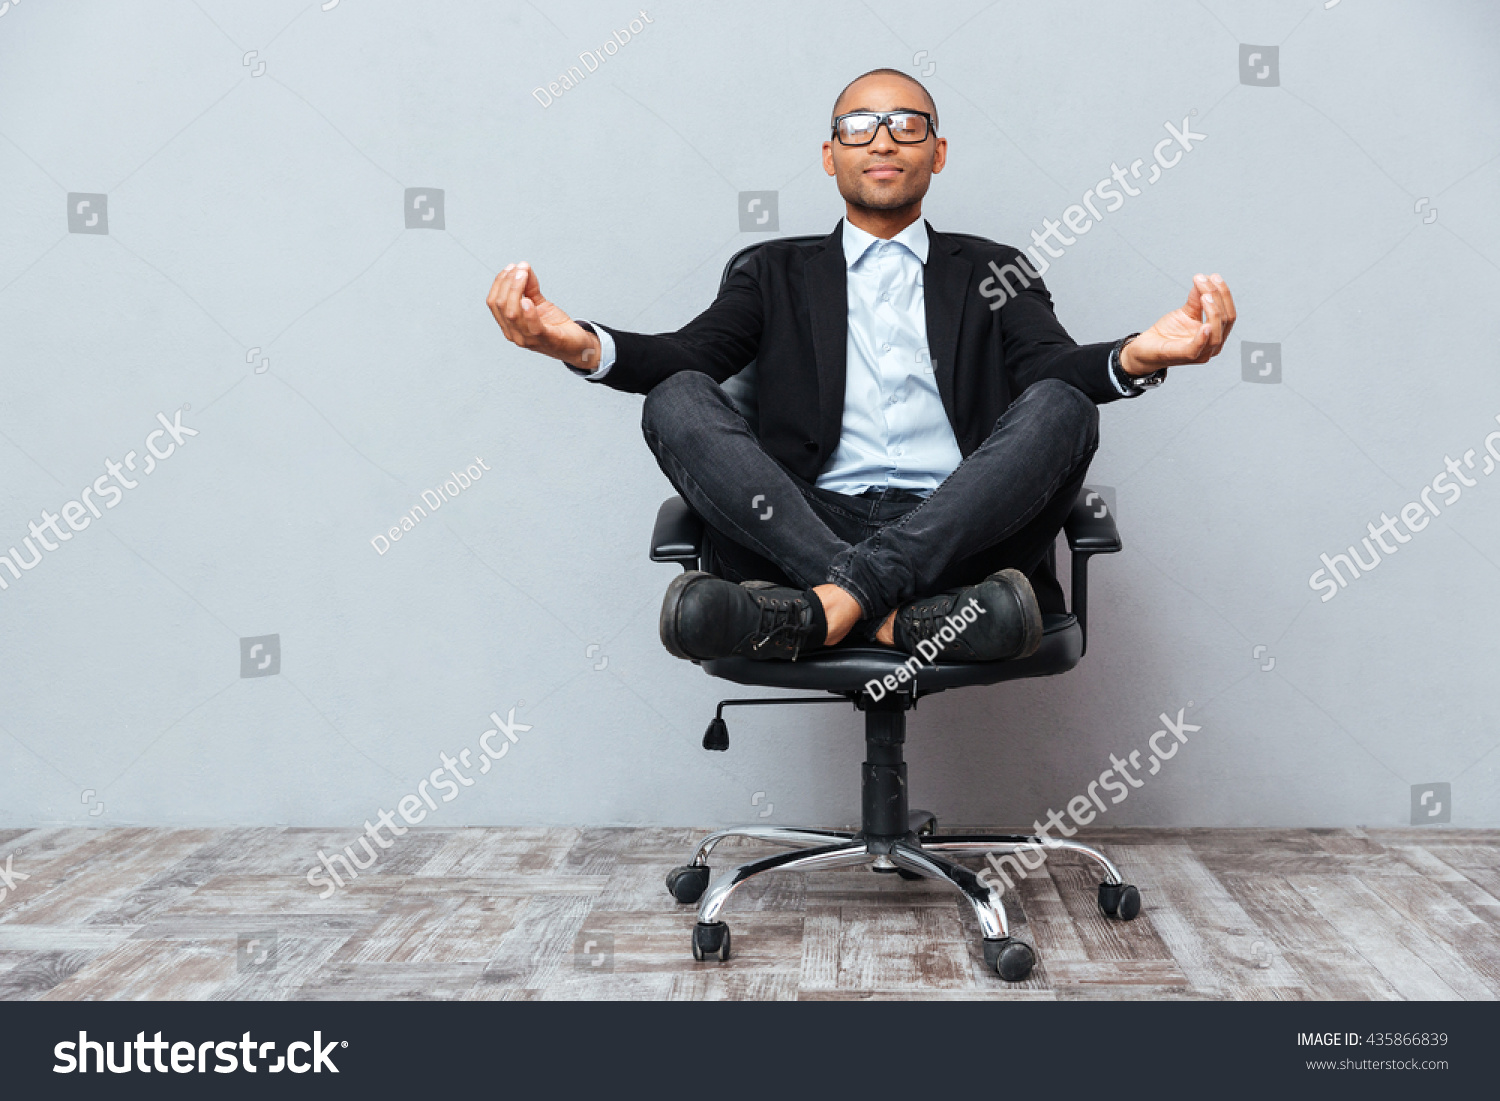 Relaxed handsome african young man sitting and meditating on office chair #435866839